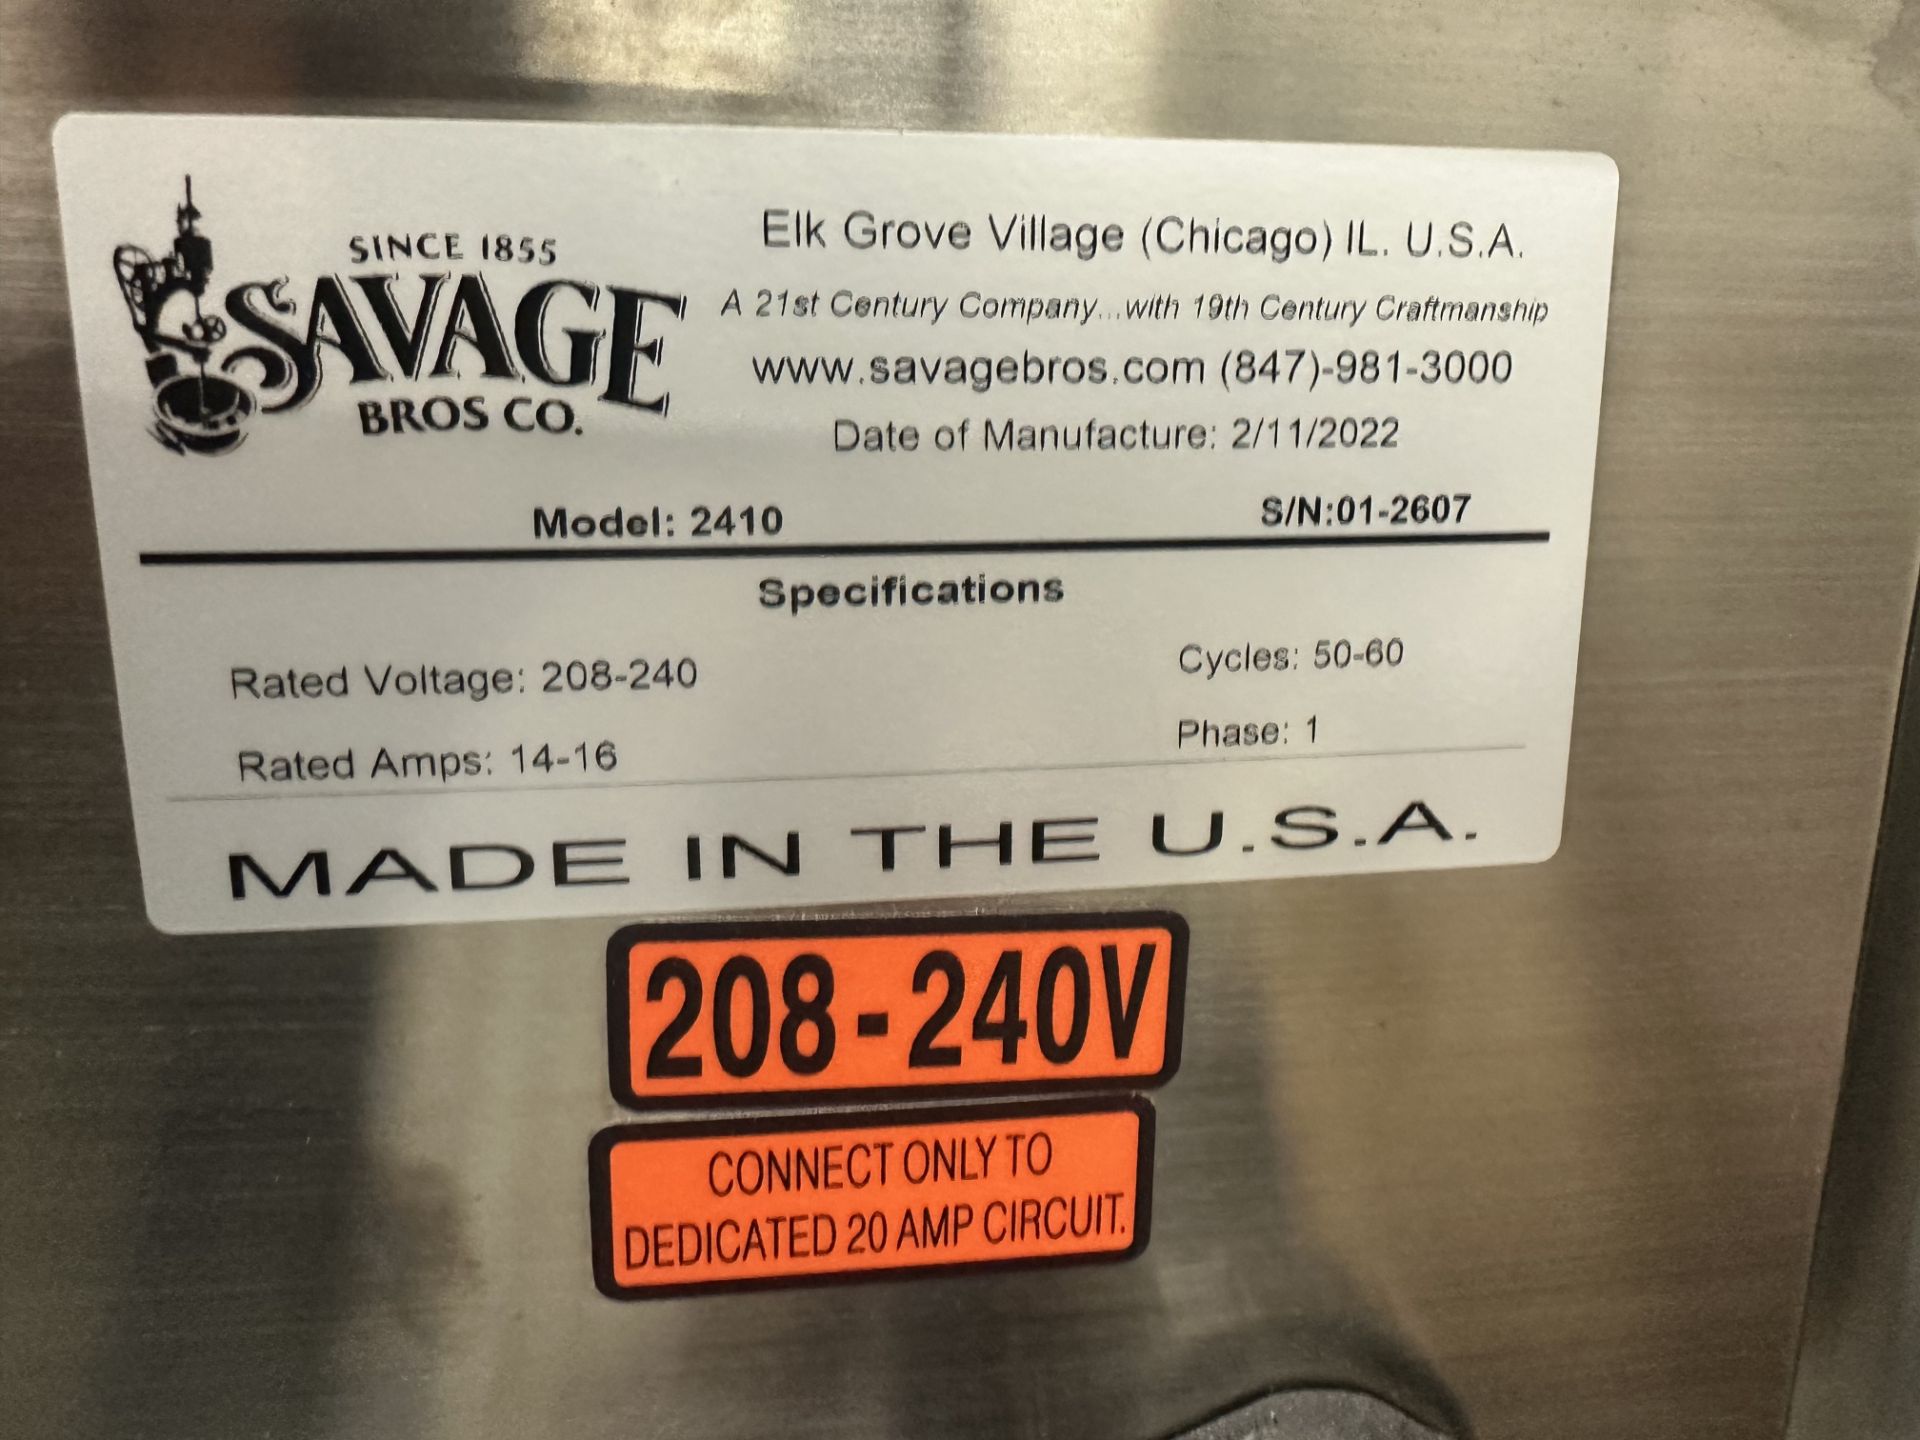 Used Savage Bros Table-Top Automatic Electric Cooker Mixer w/ PLC Controls Model 2410 / FireMixer-14 - Image 2 of 2